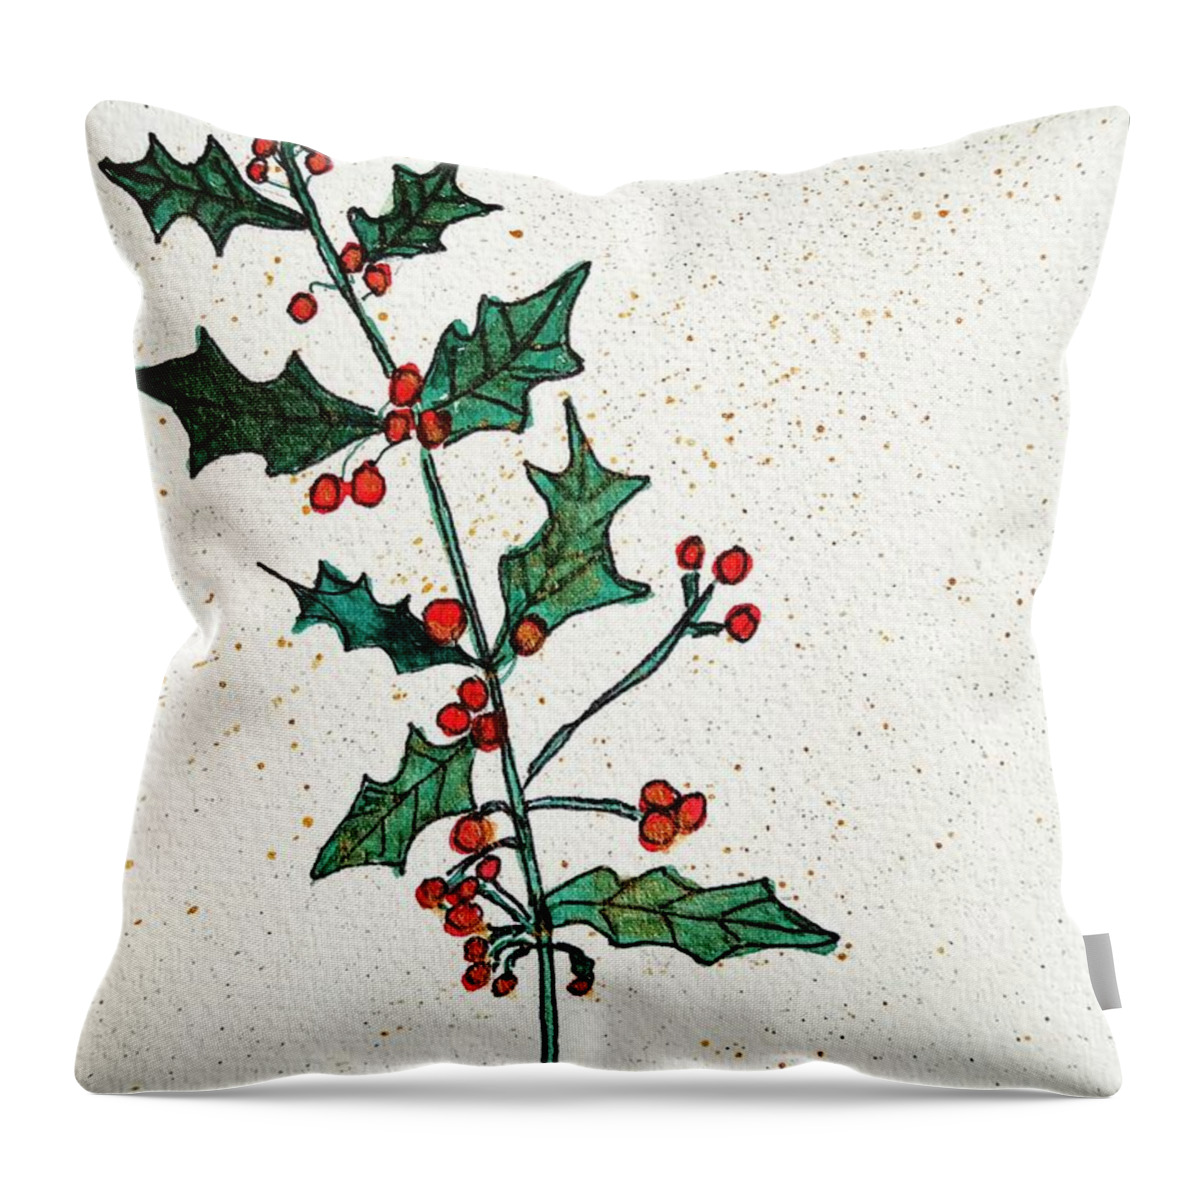 Holly Throw Pillow featuring the painting Holly Berry Branch by Shady Lane Studios-Karen Howard